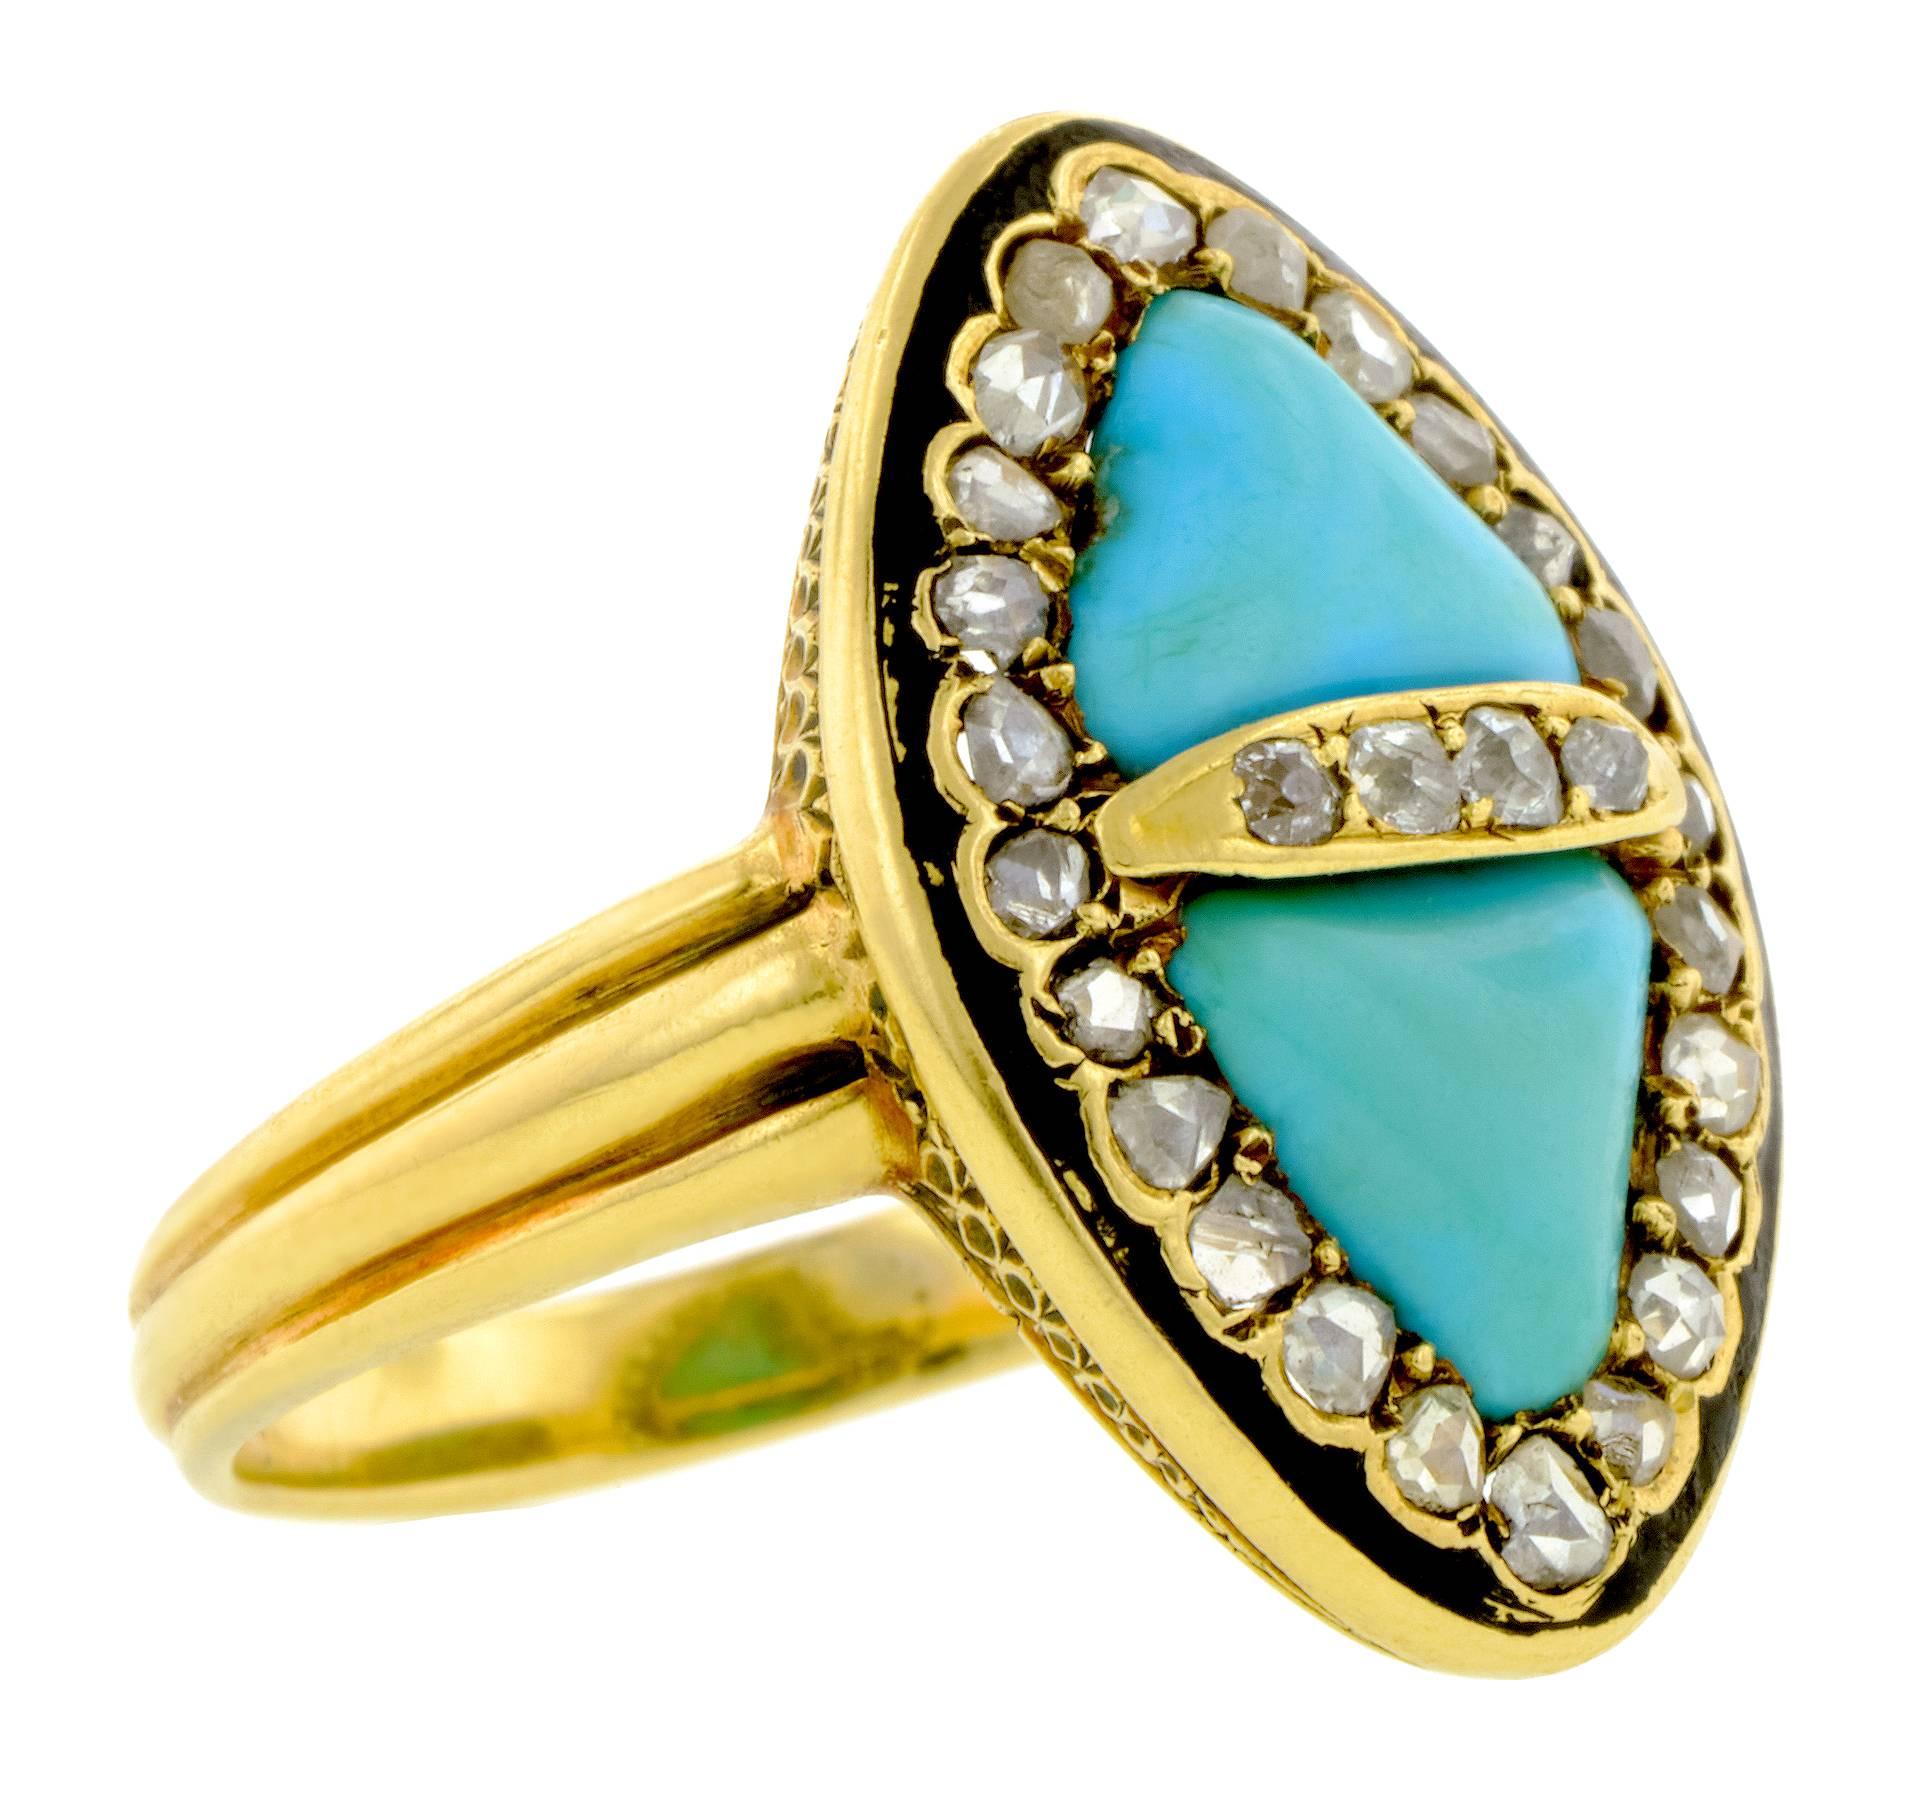 Victorian turquoise & diamond ring set with two triangular cabochon turquoises, framed by Rose cut diamonds measuring app. 1.2-1.5mm & Old Mine cut diamonds weighing app. 0.07ctw, fashioned in 18k gold. French import mark. Circa 1895. Size 6.5.